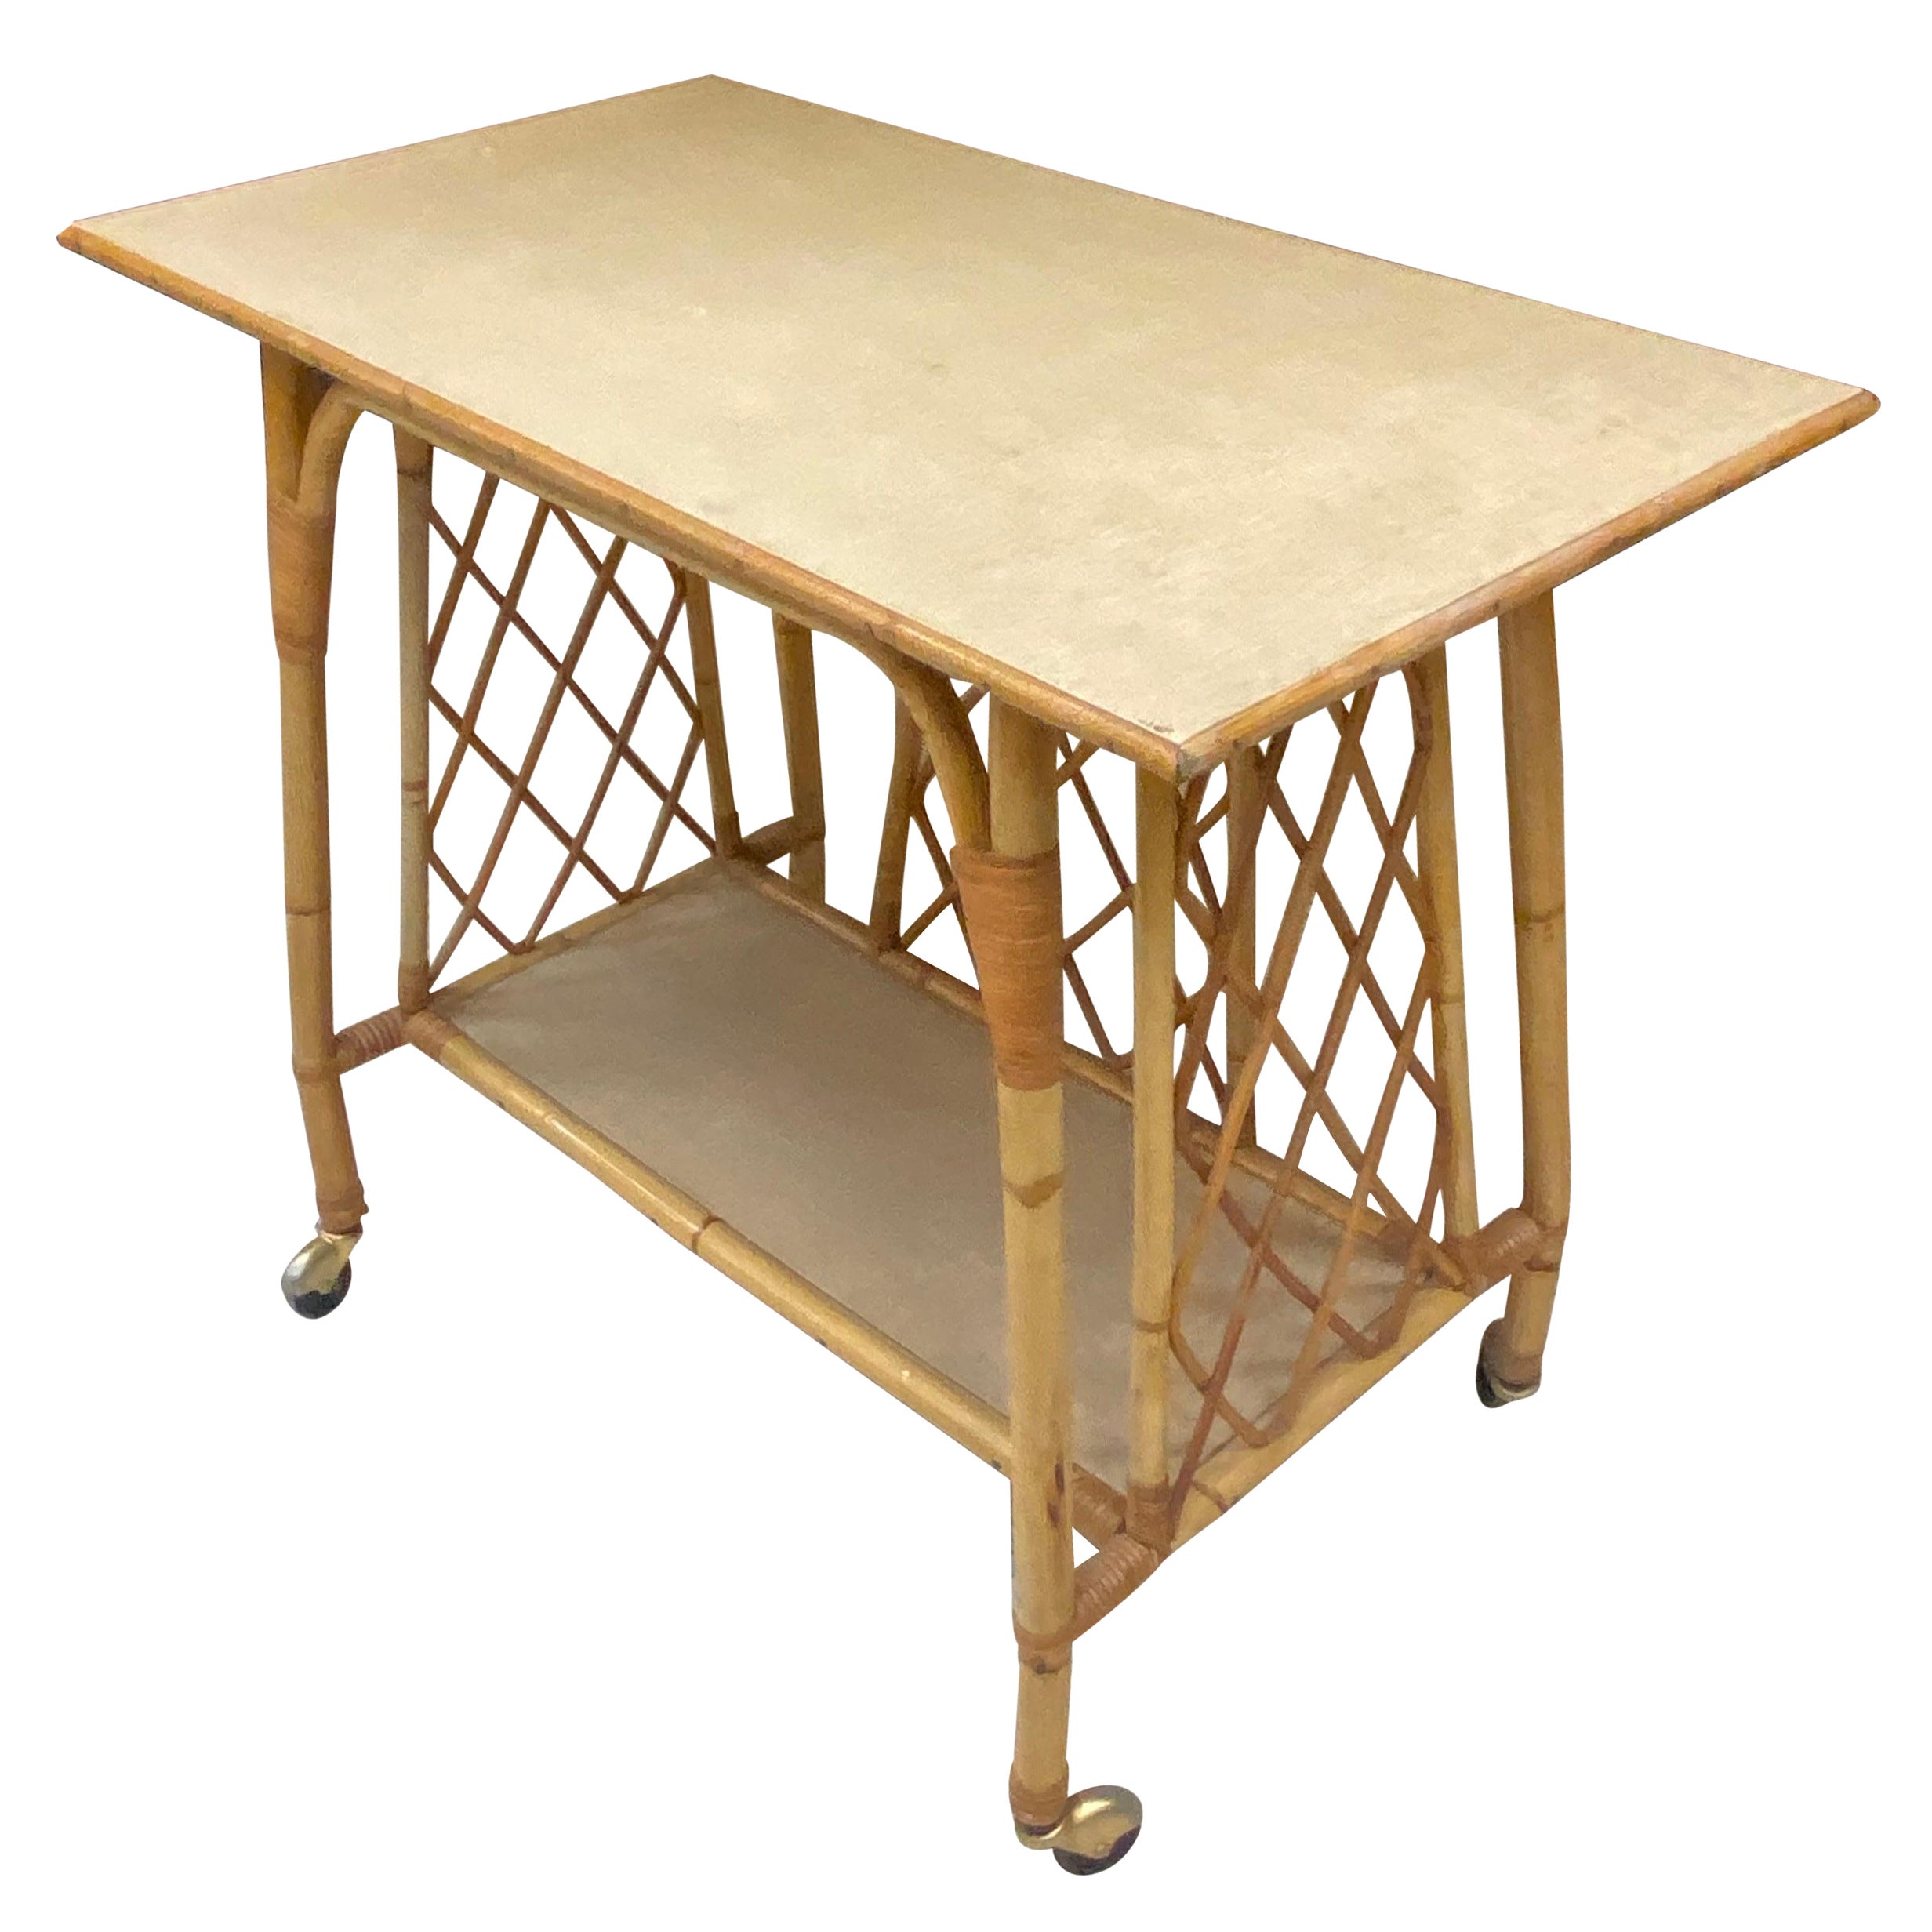 Serving Table That Can Serve as a Multimedia Table 'TV, Hi-Fi' in Bamboo, 1960 For Sale